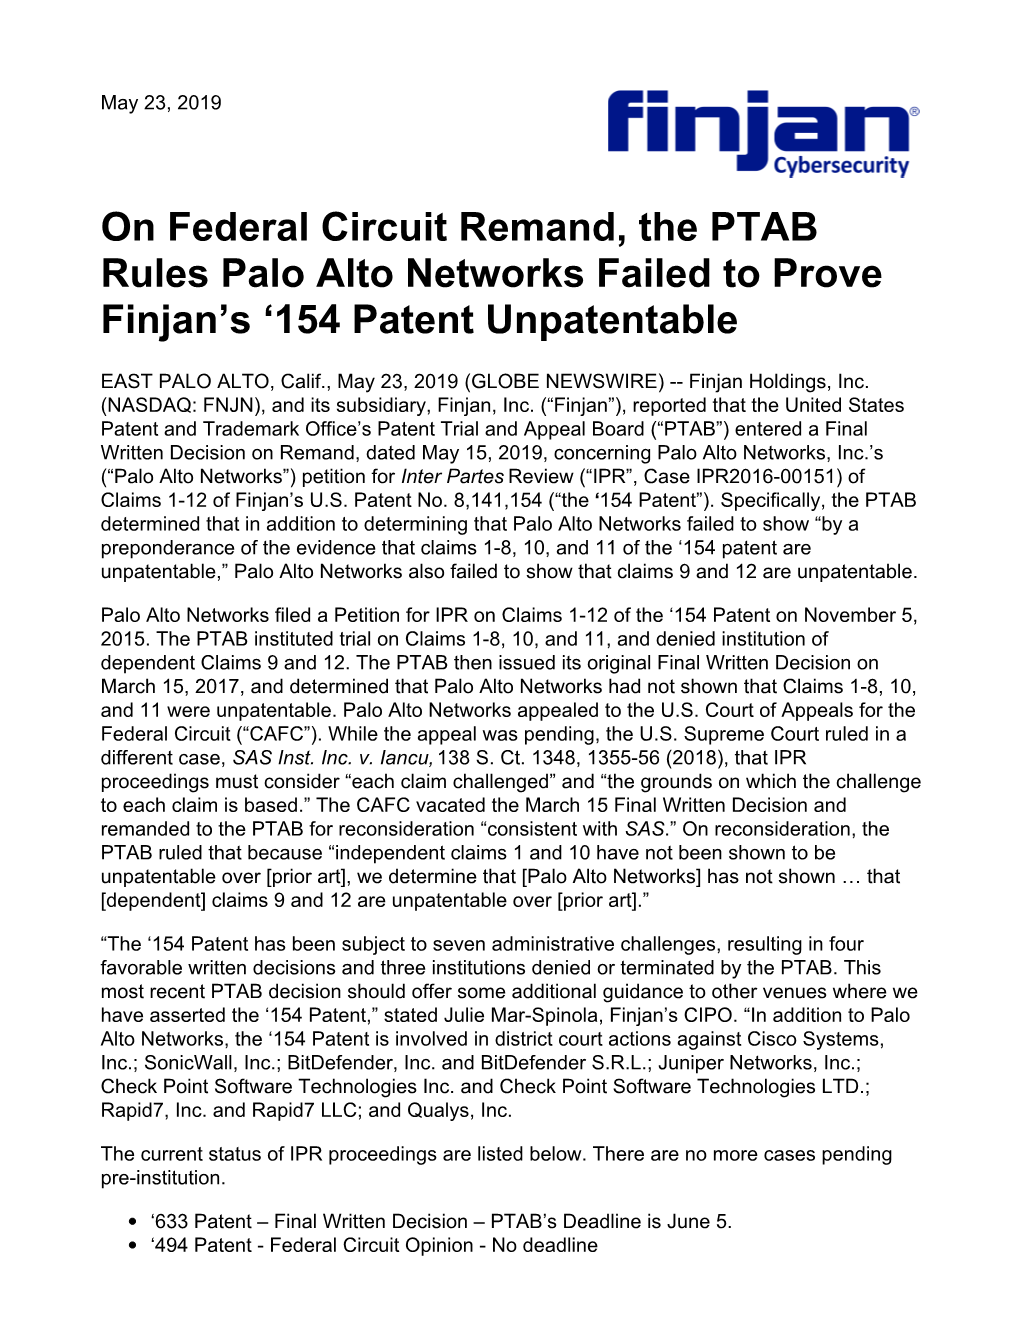 On Federal Circuit Remand, the PTAB Rules Palo Alto Networks Failed to Prove Finjan’S ‘154 Patent Unpatentable